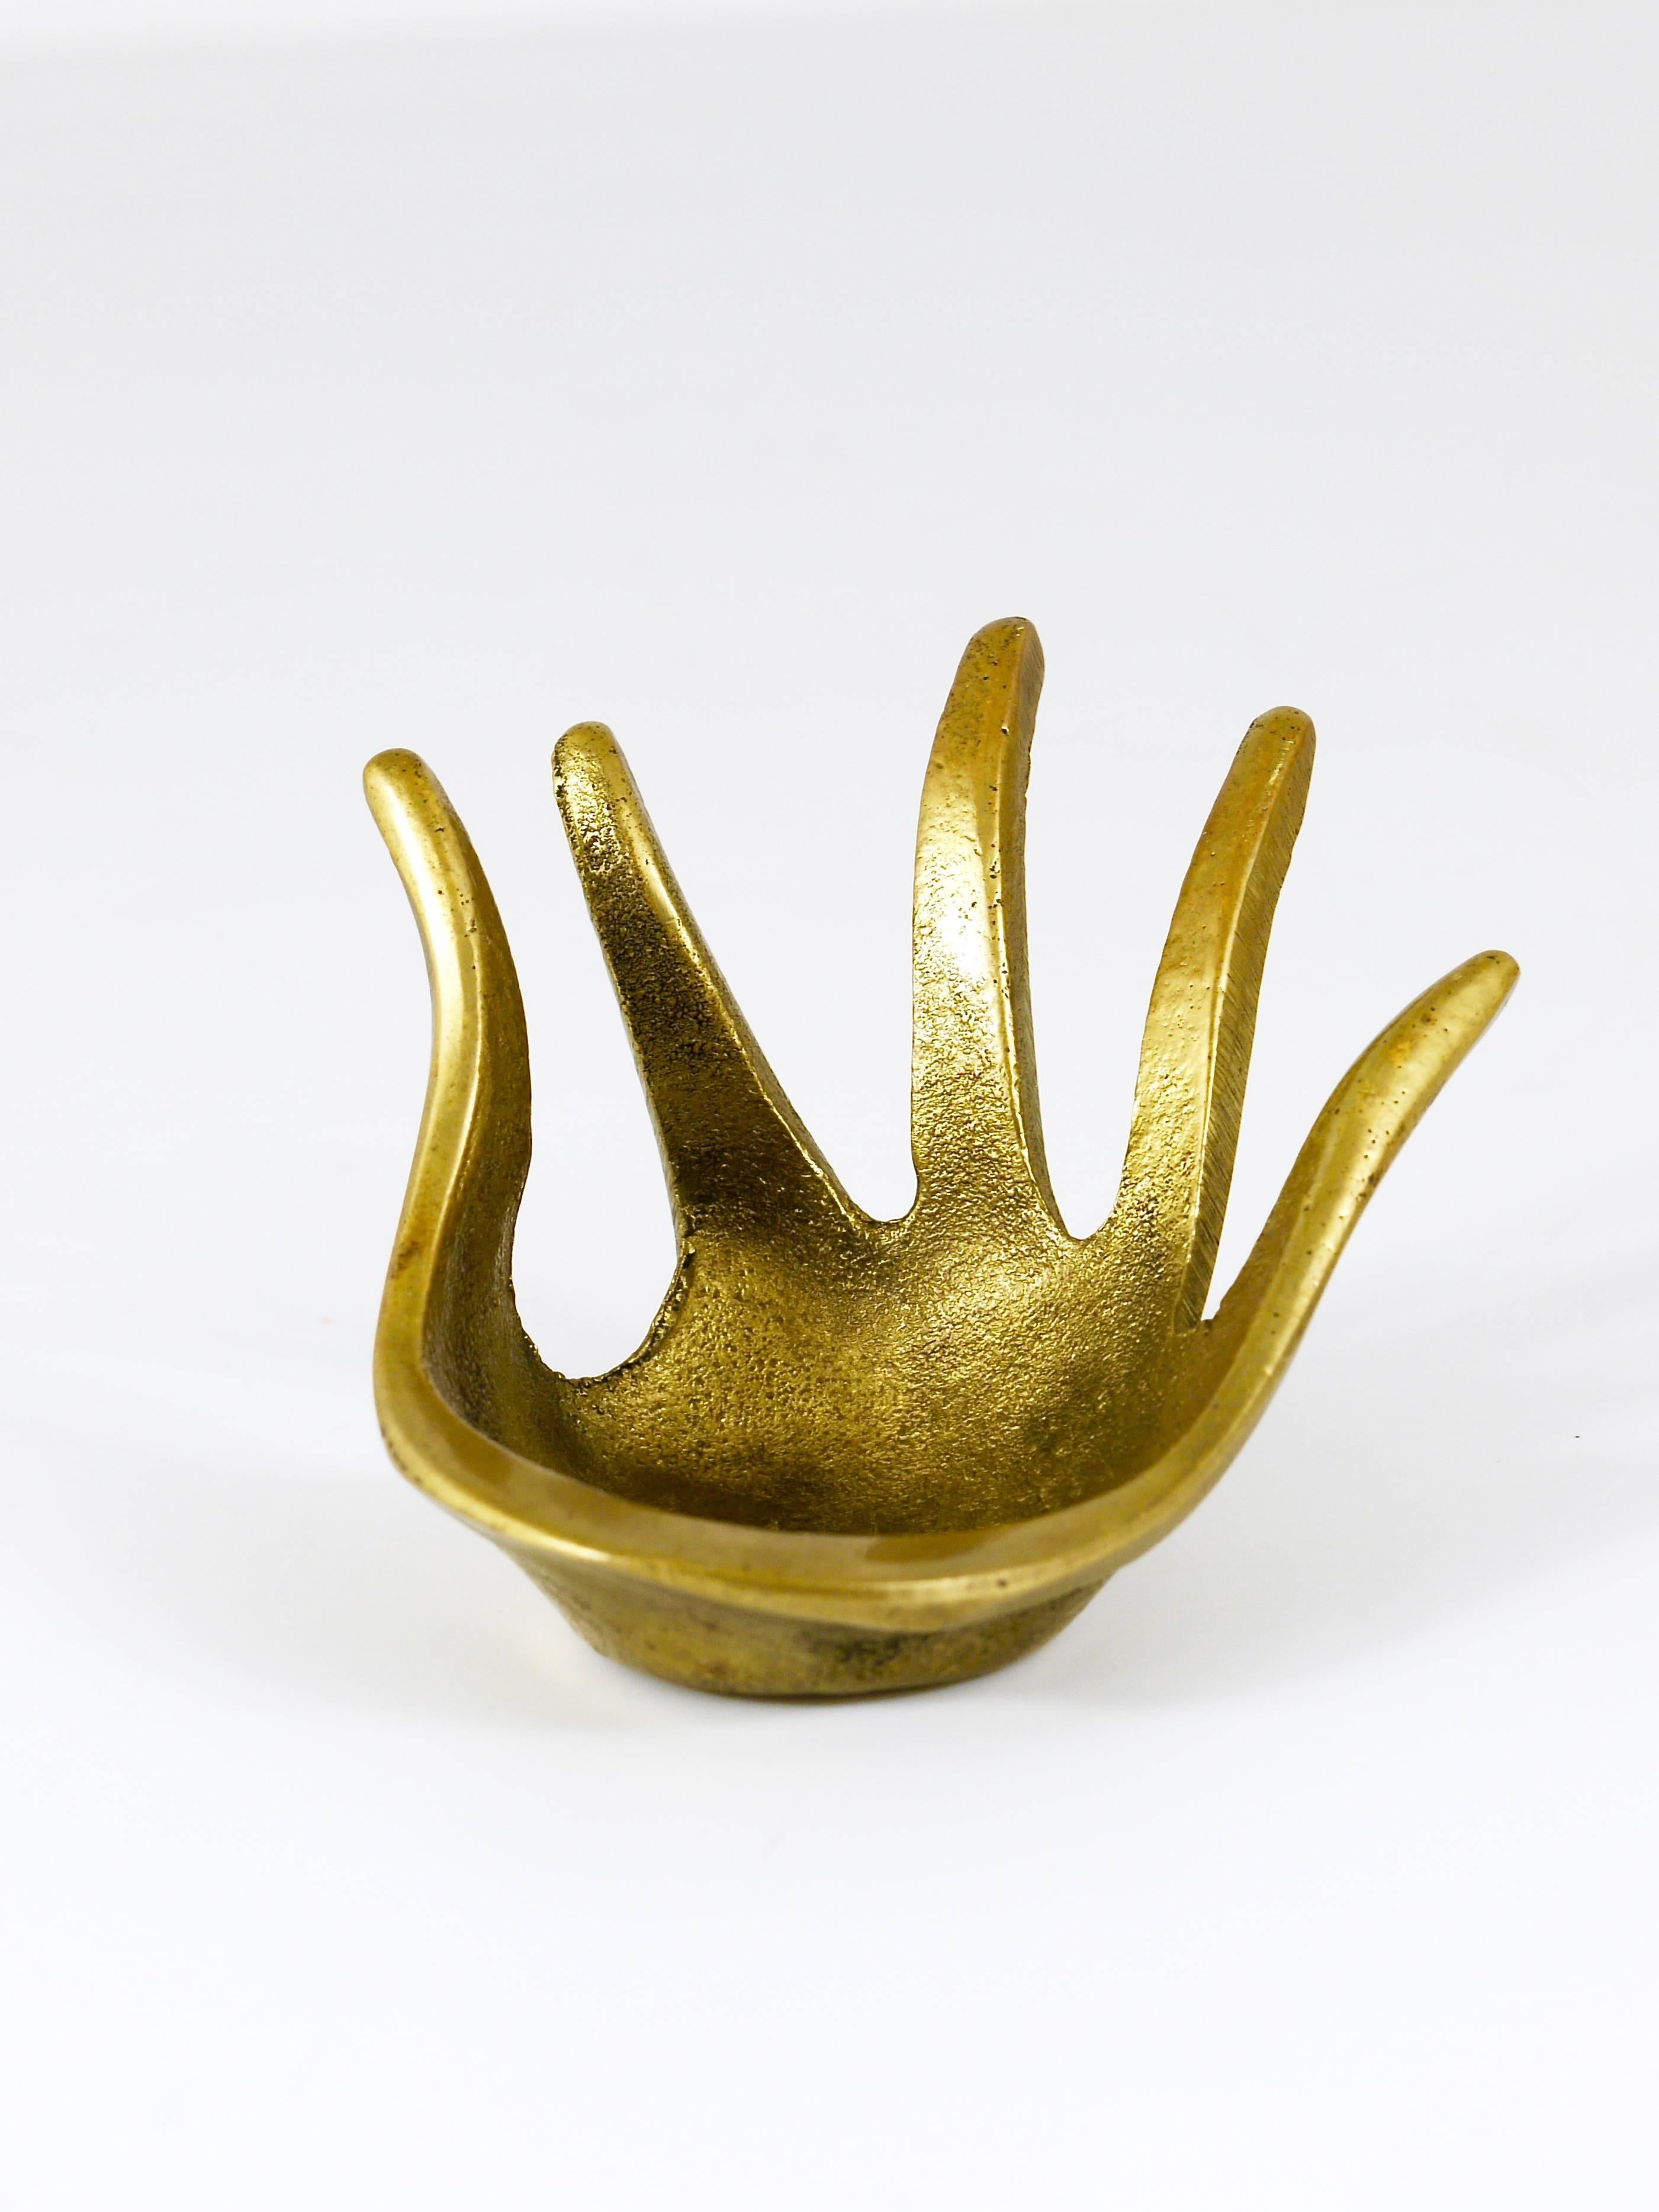 A beautiful modernist ashtray in the shape of a hand. A humorous design by Walter Bosse, executed by Baller Austria in the 1950s. Made of brass, in excellent condition.